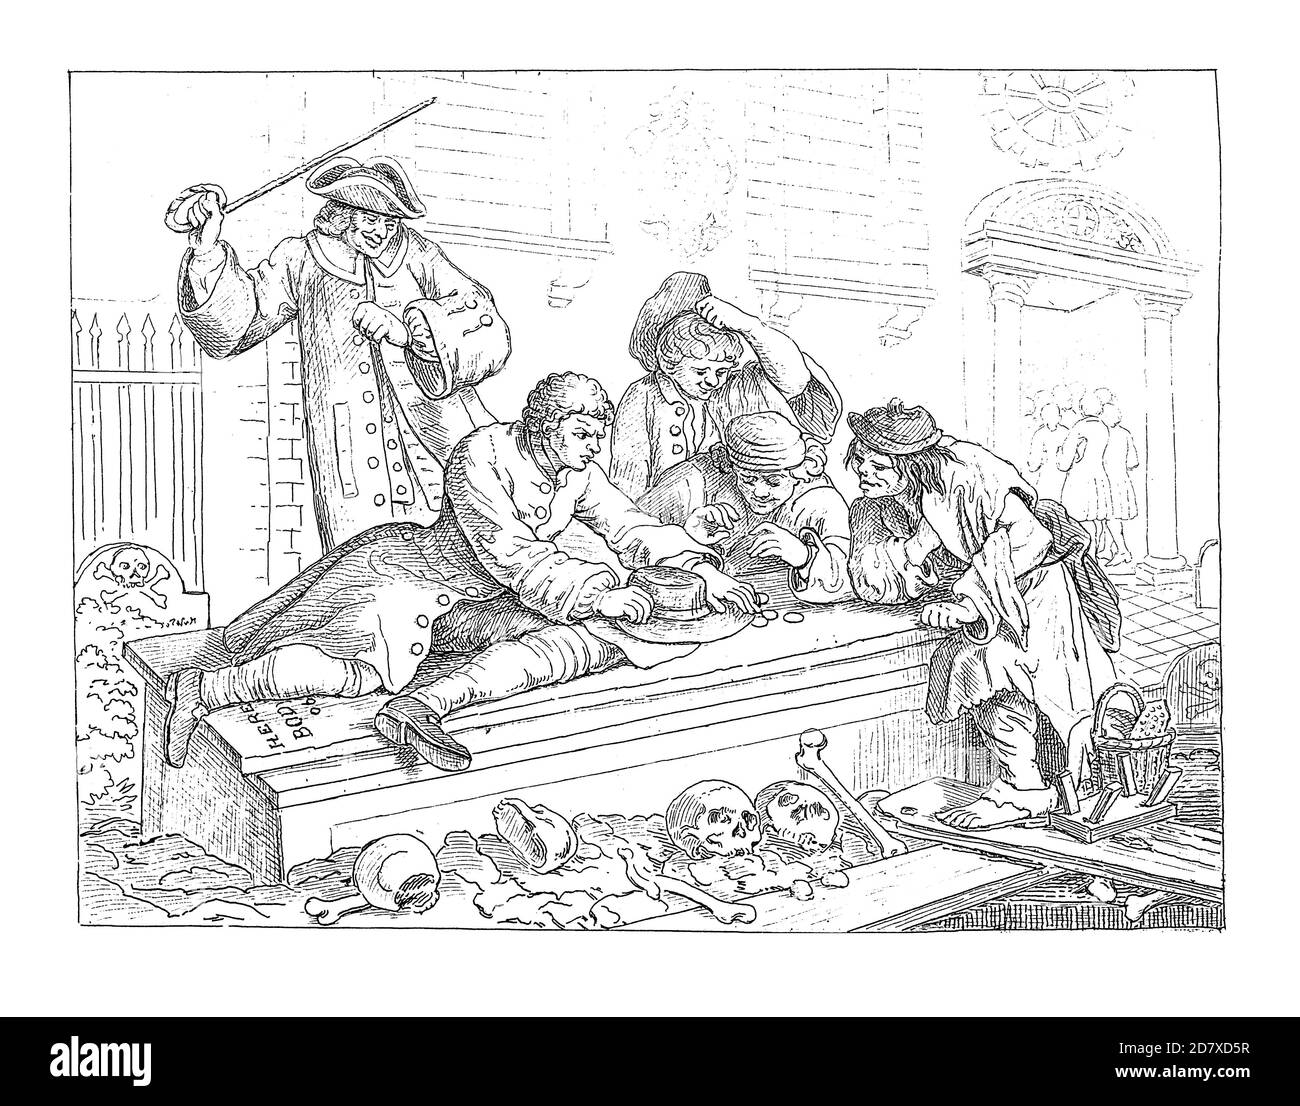 19th-century illustration depicting The Idle 'Prentice at Play in the Church Yard, during Divine Service, plate from 12 plot-linked engravings (called Stock Photo